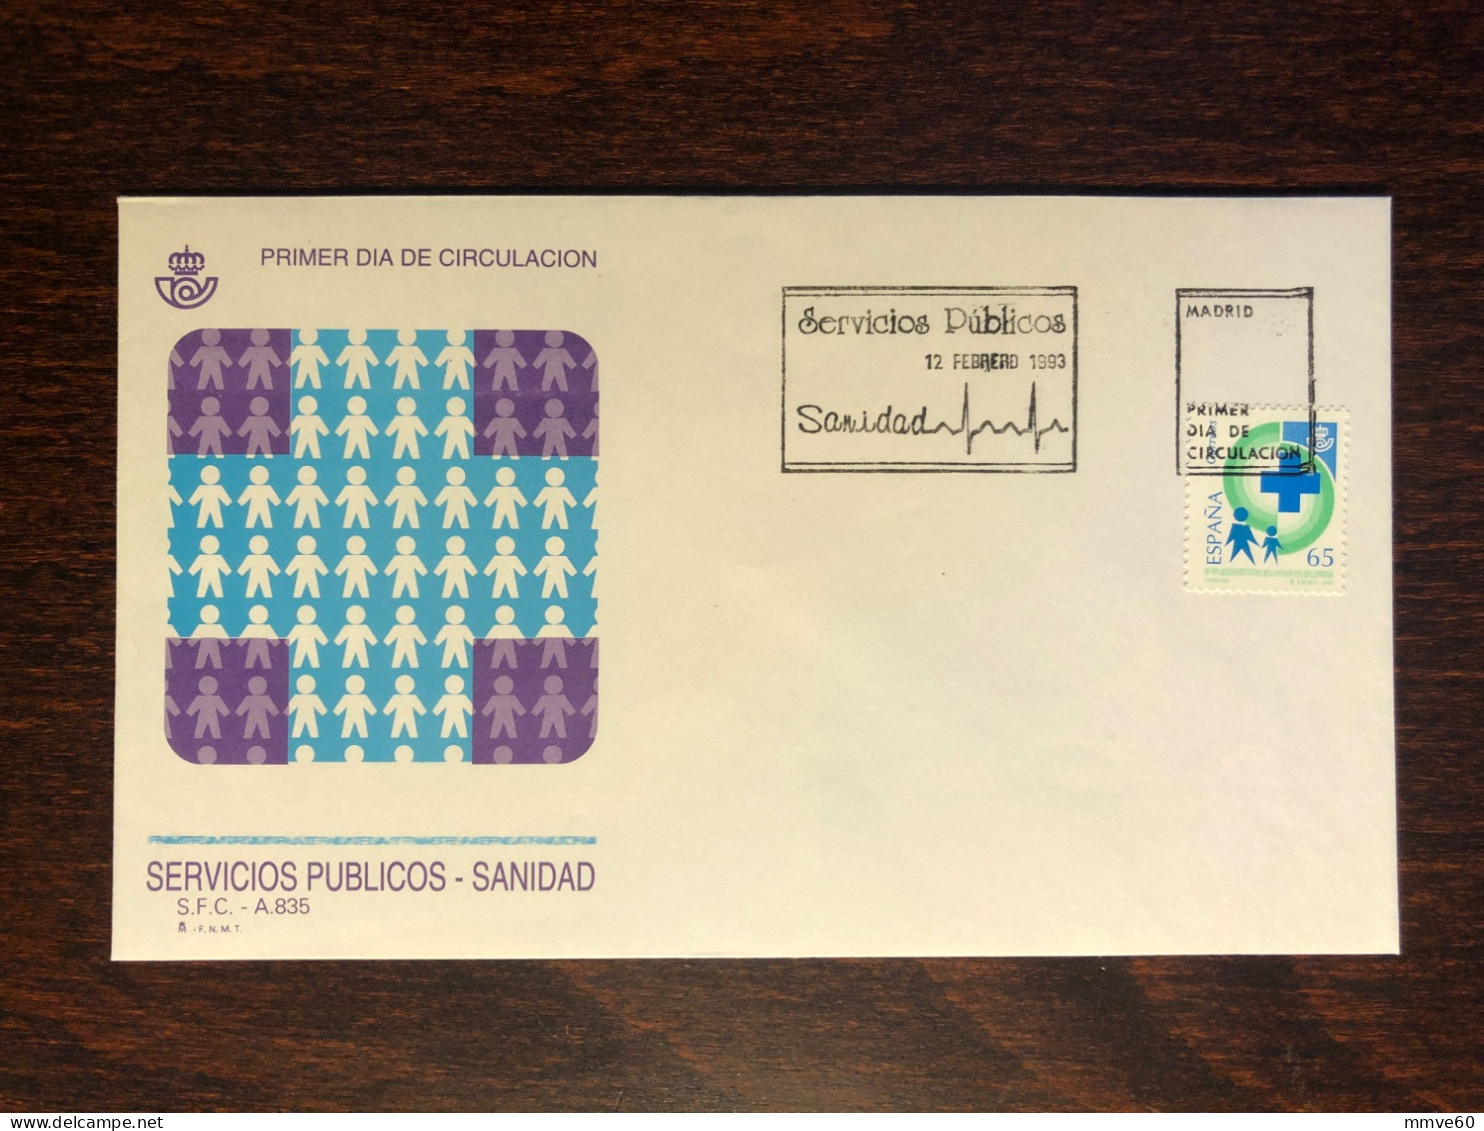 SPAIN FDC COVER 1993 YEAR HEALTH INSURANCE HEALTH MEDICINE STAMPS - FDC